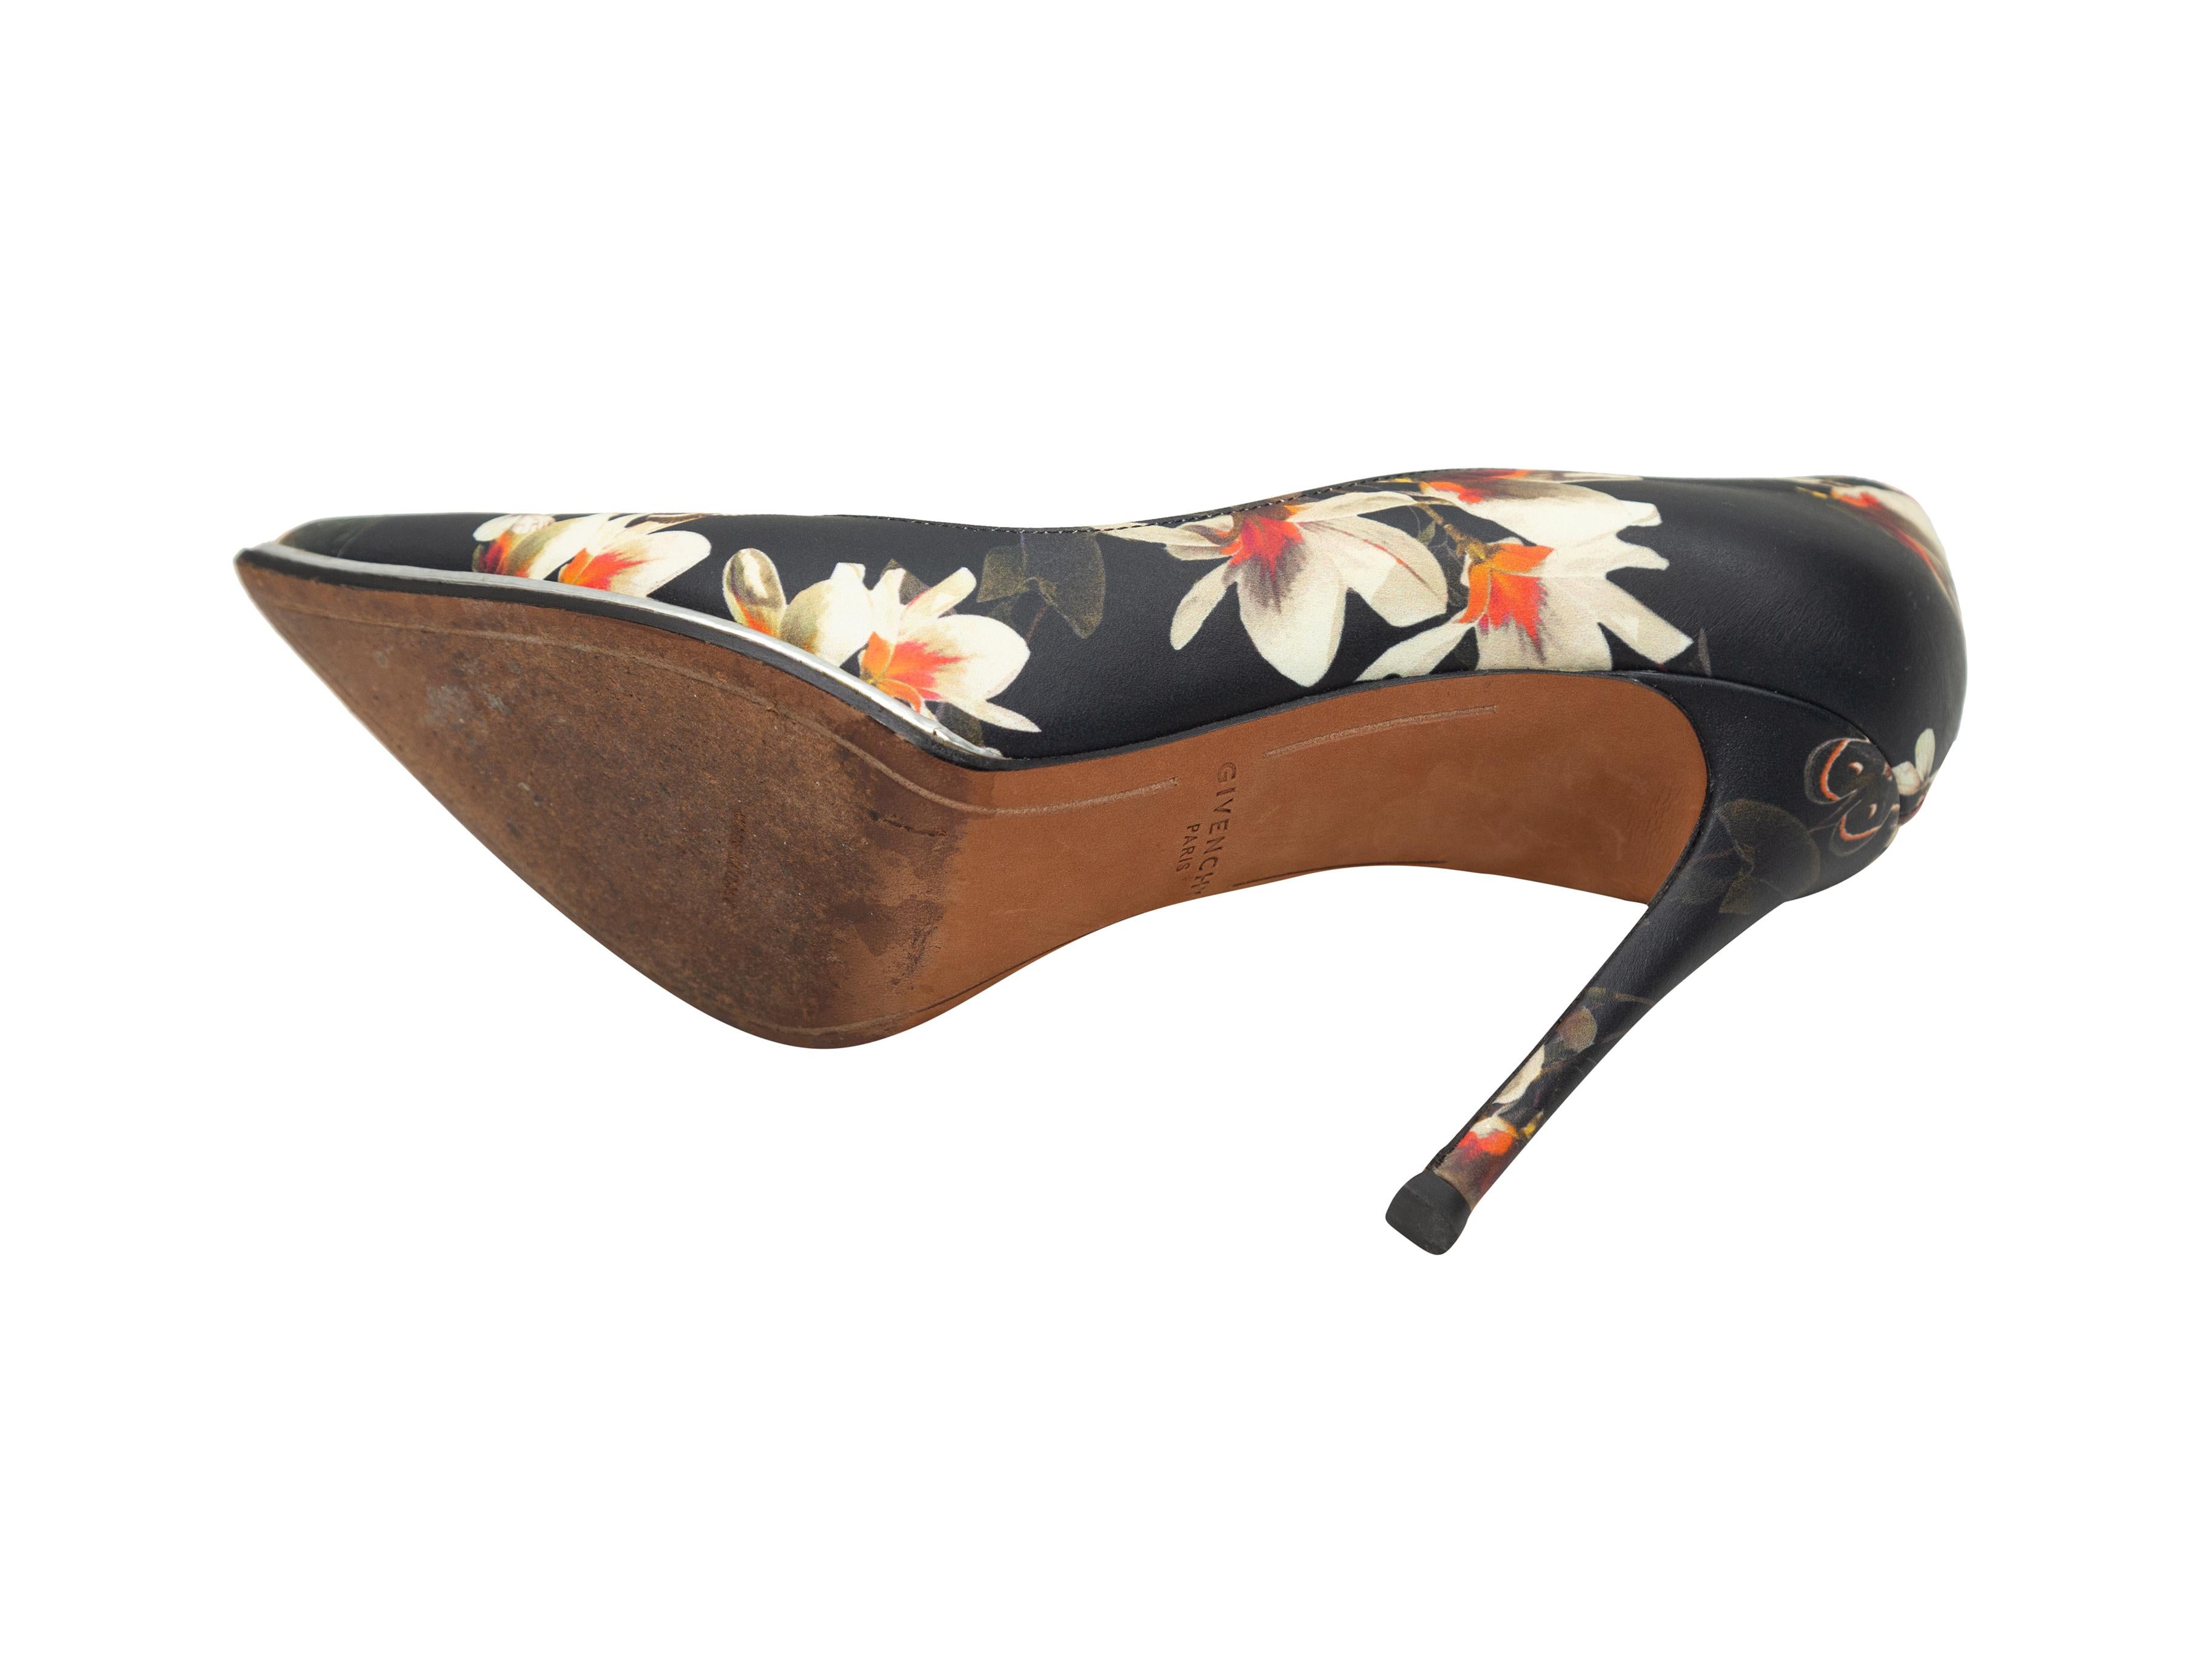 Product details: Black and multicolor leather pointed-toe pumps by Givenchy. Floral print throughout. Designer size 36.5. 4